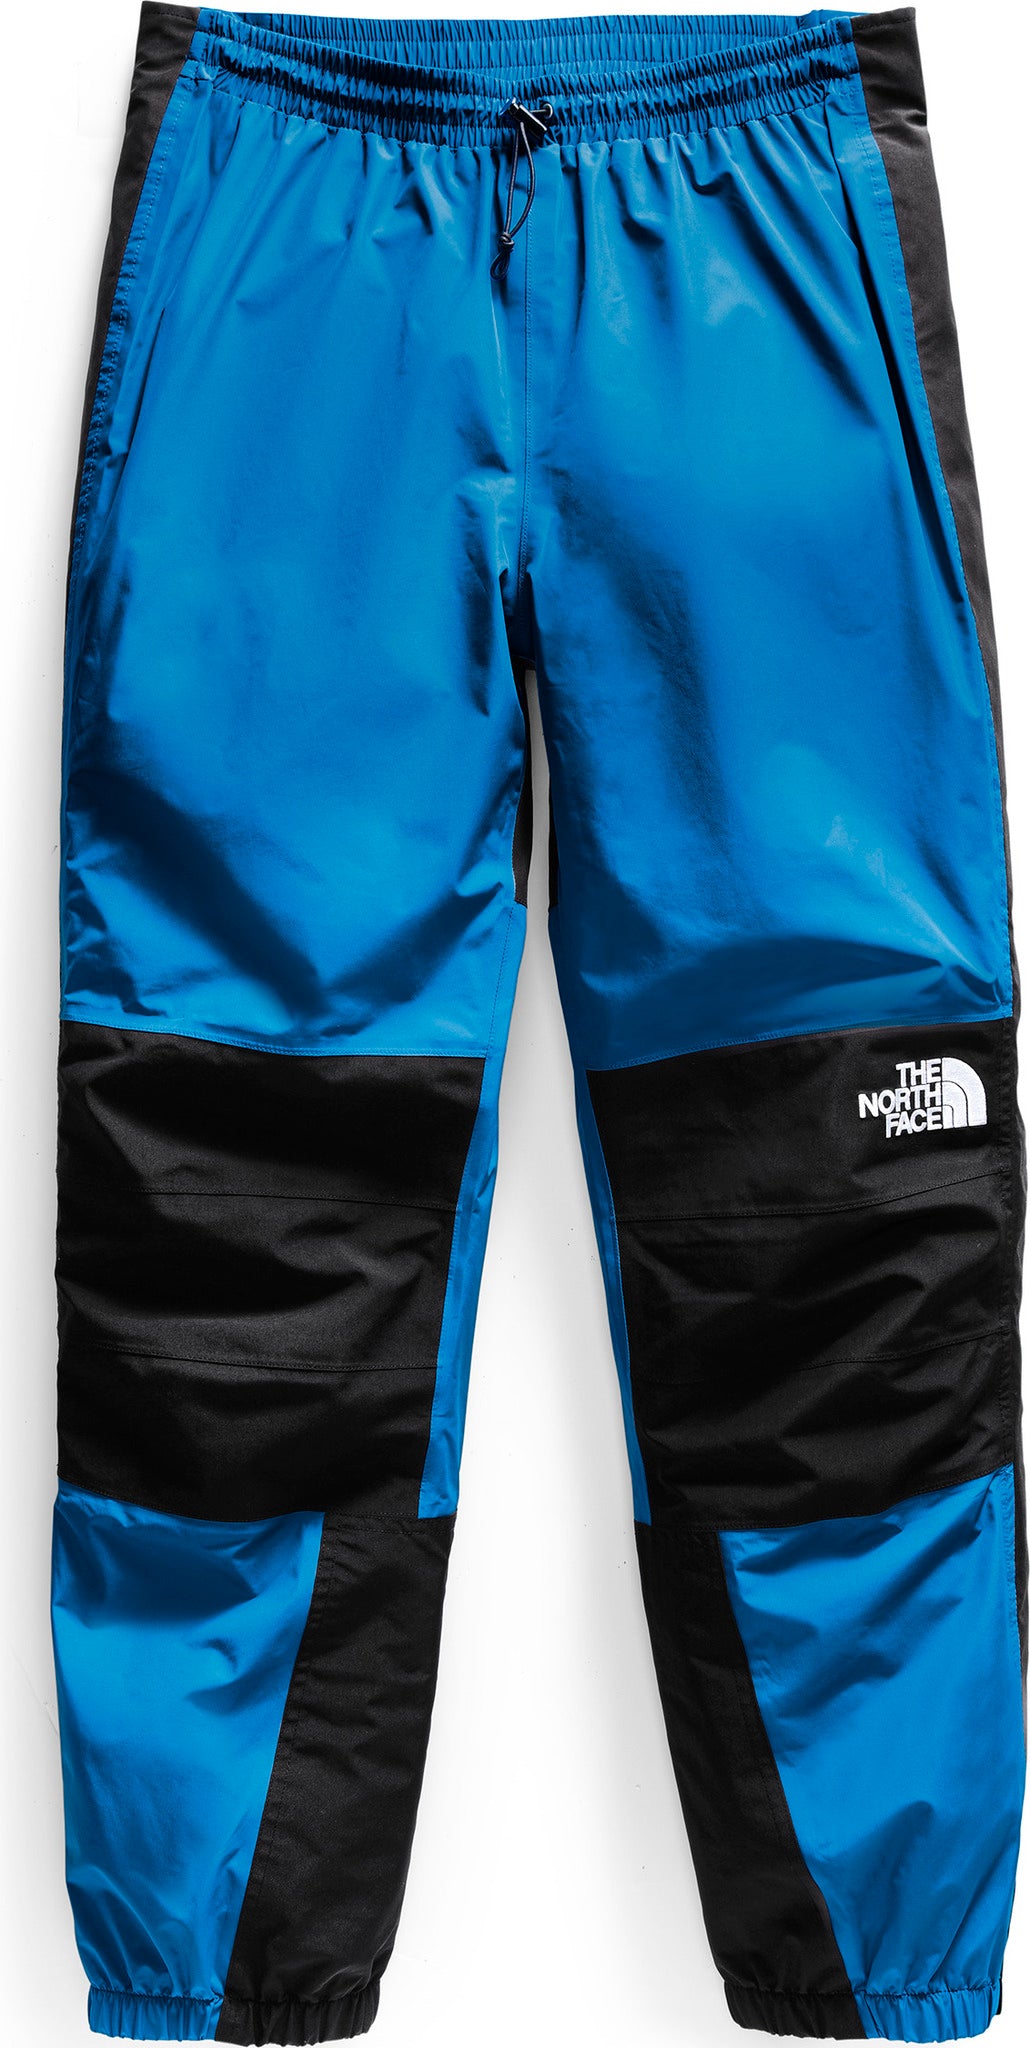 north face mountain pants